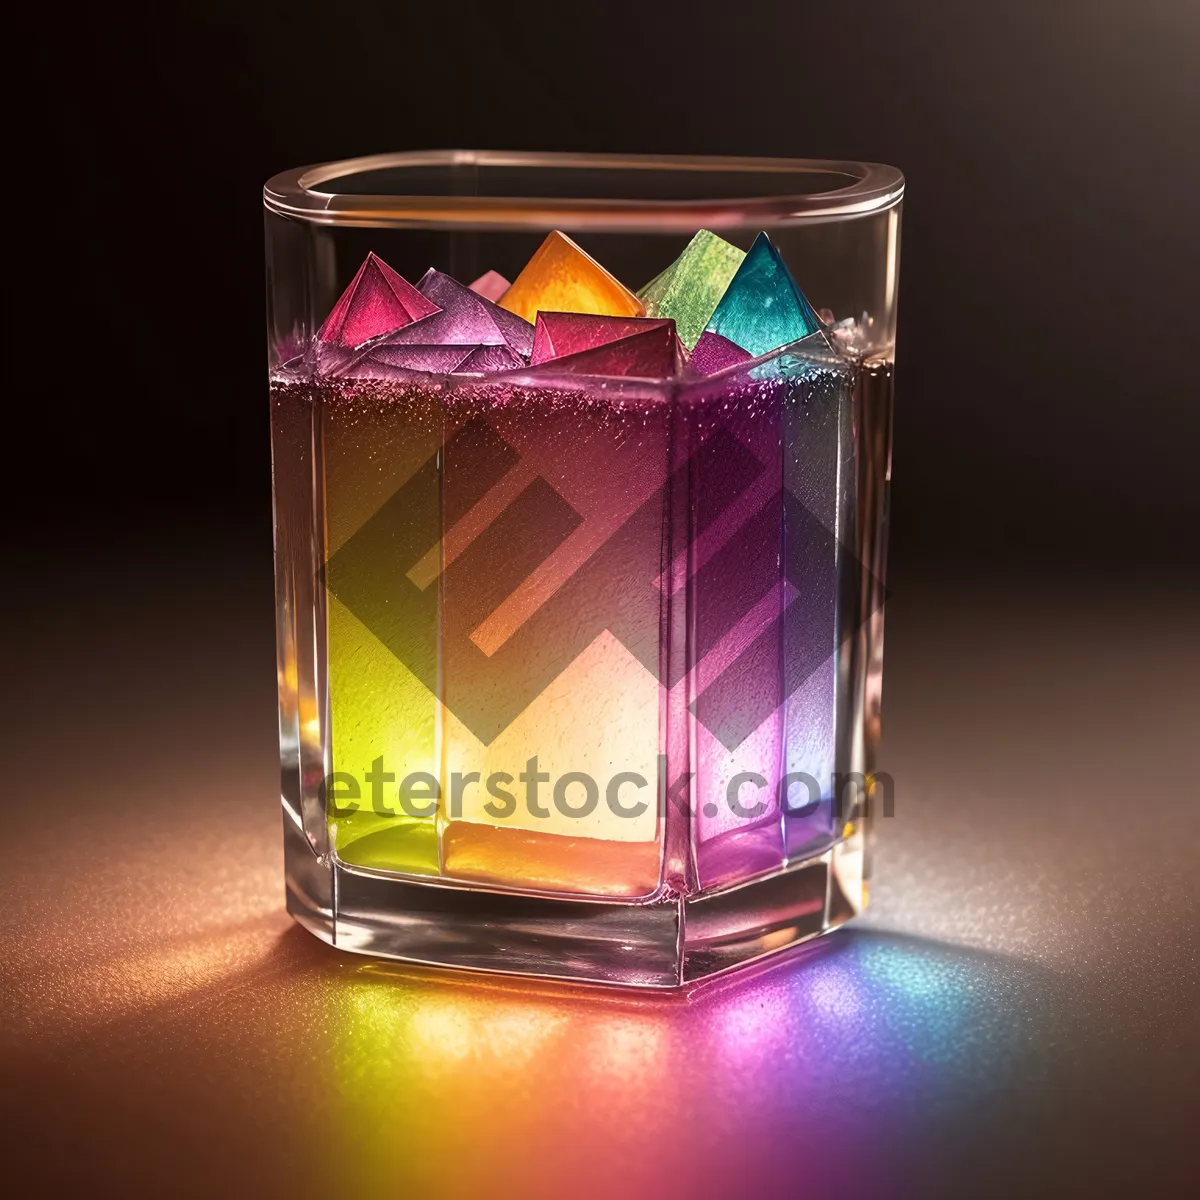 Picture of Refreshing Golden Vodka Cocktail in Glass Mug